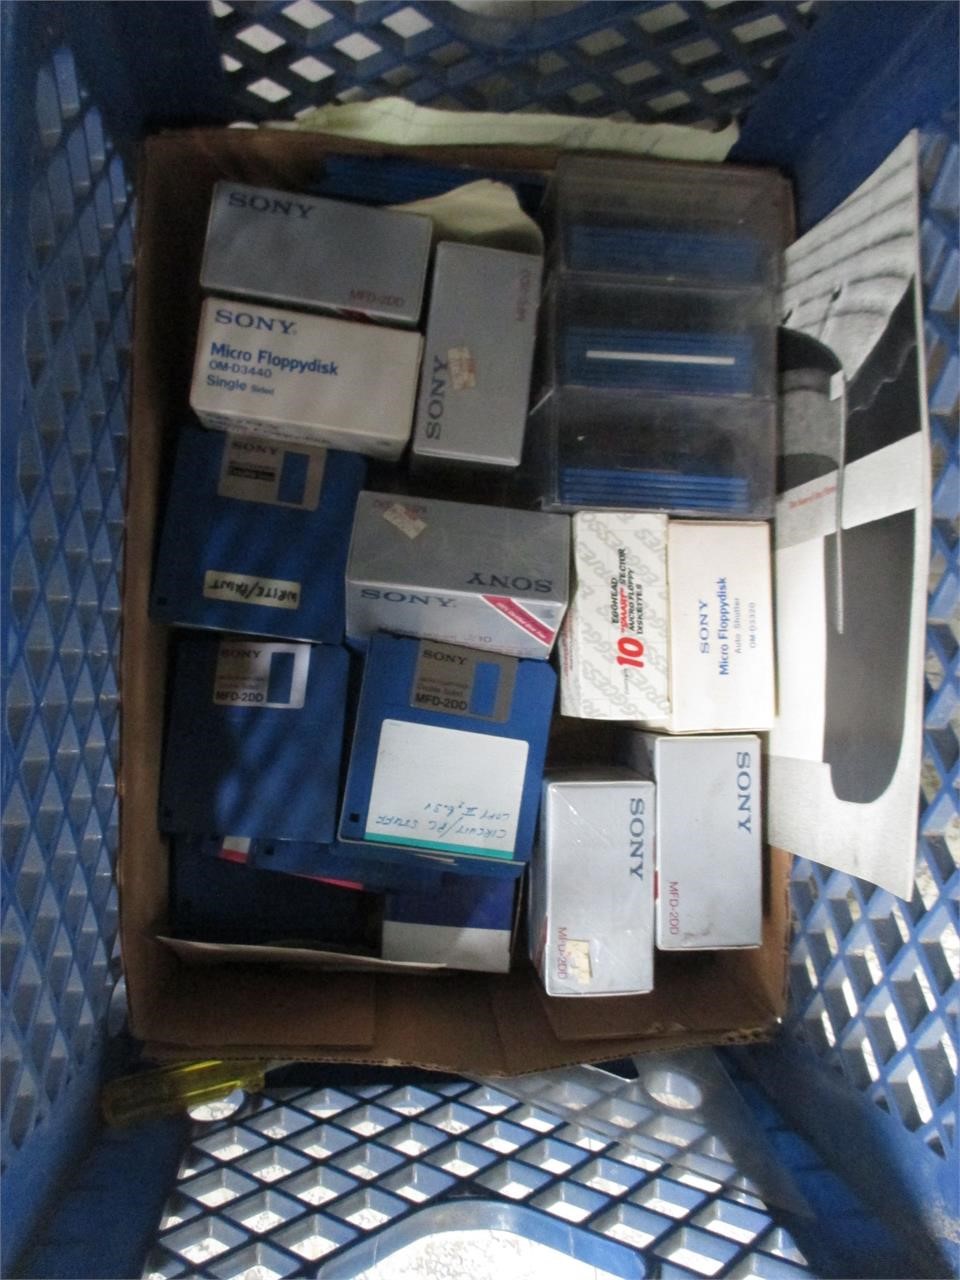 Lot of floppy disks in w/ crate